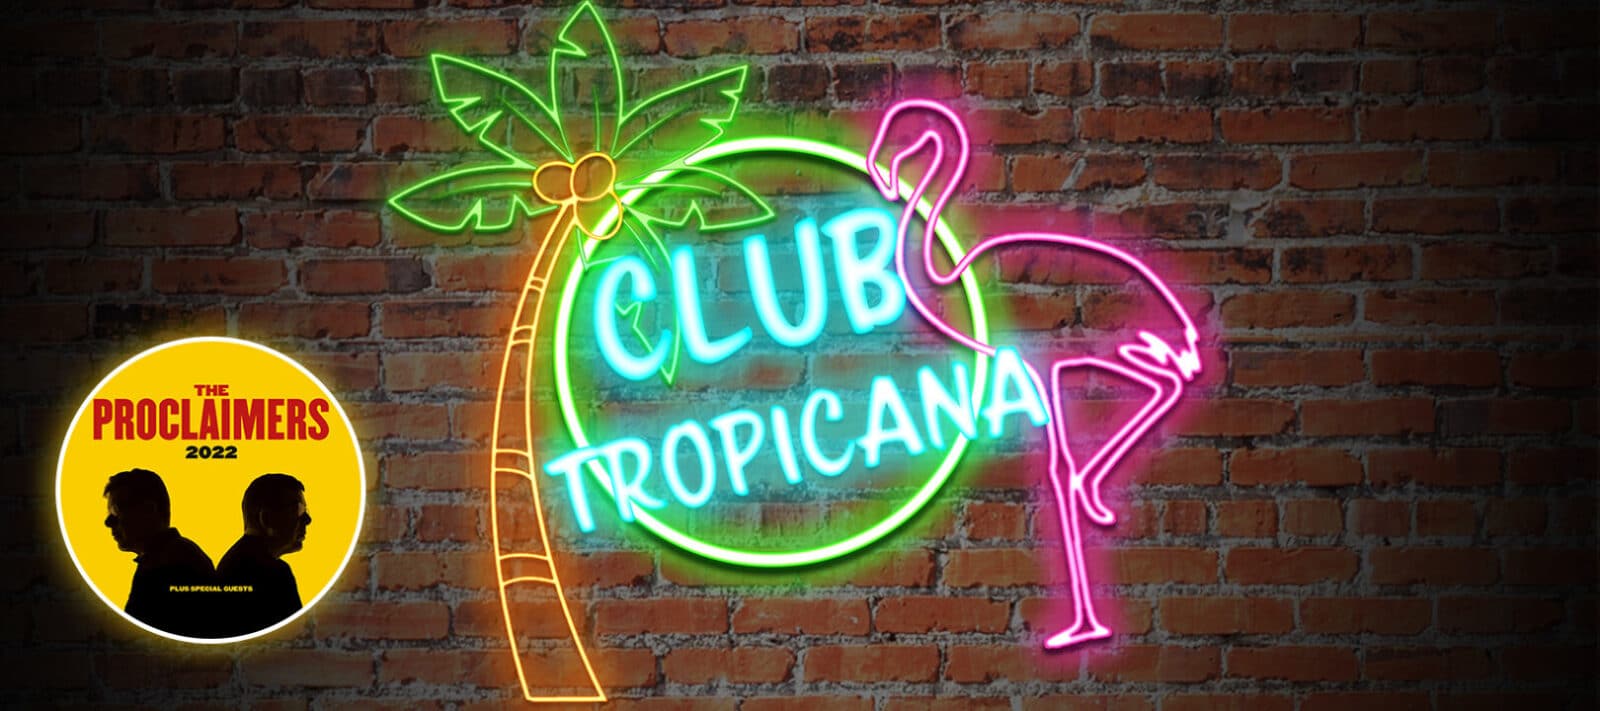 Club Tropicana & Proclaimers Afterparty